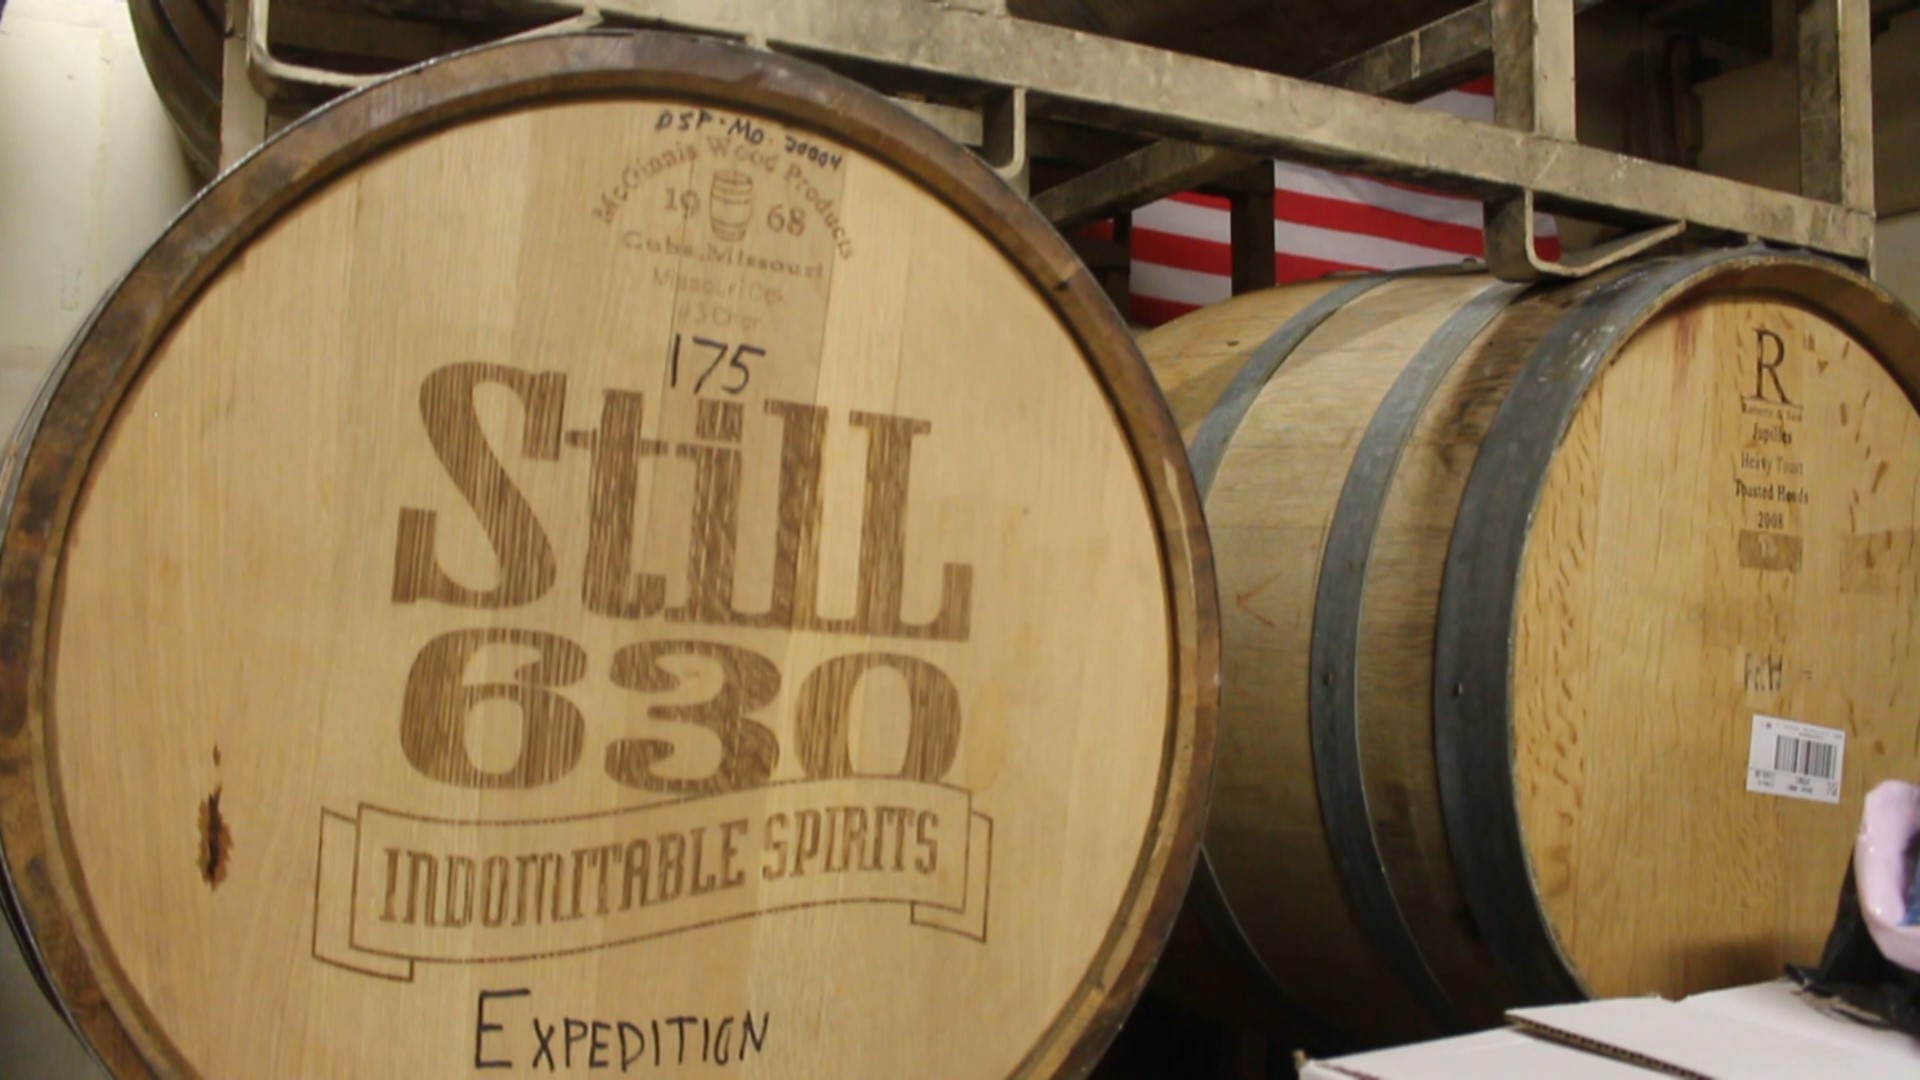 Missouri will soon join the ranks of Tennessee and Kentucky with a special class of whiskey. To qualify, the spirits have to meet certain qualifications.